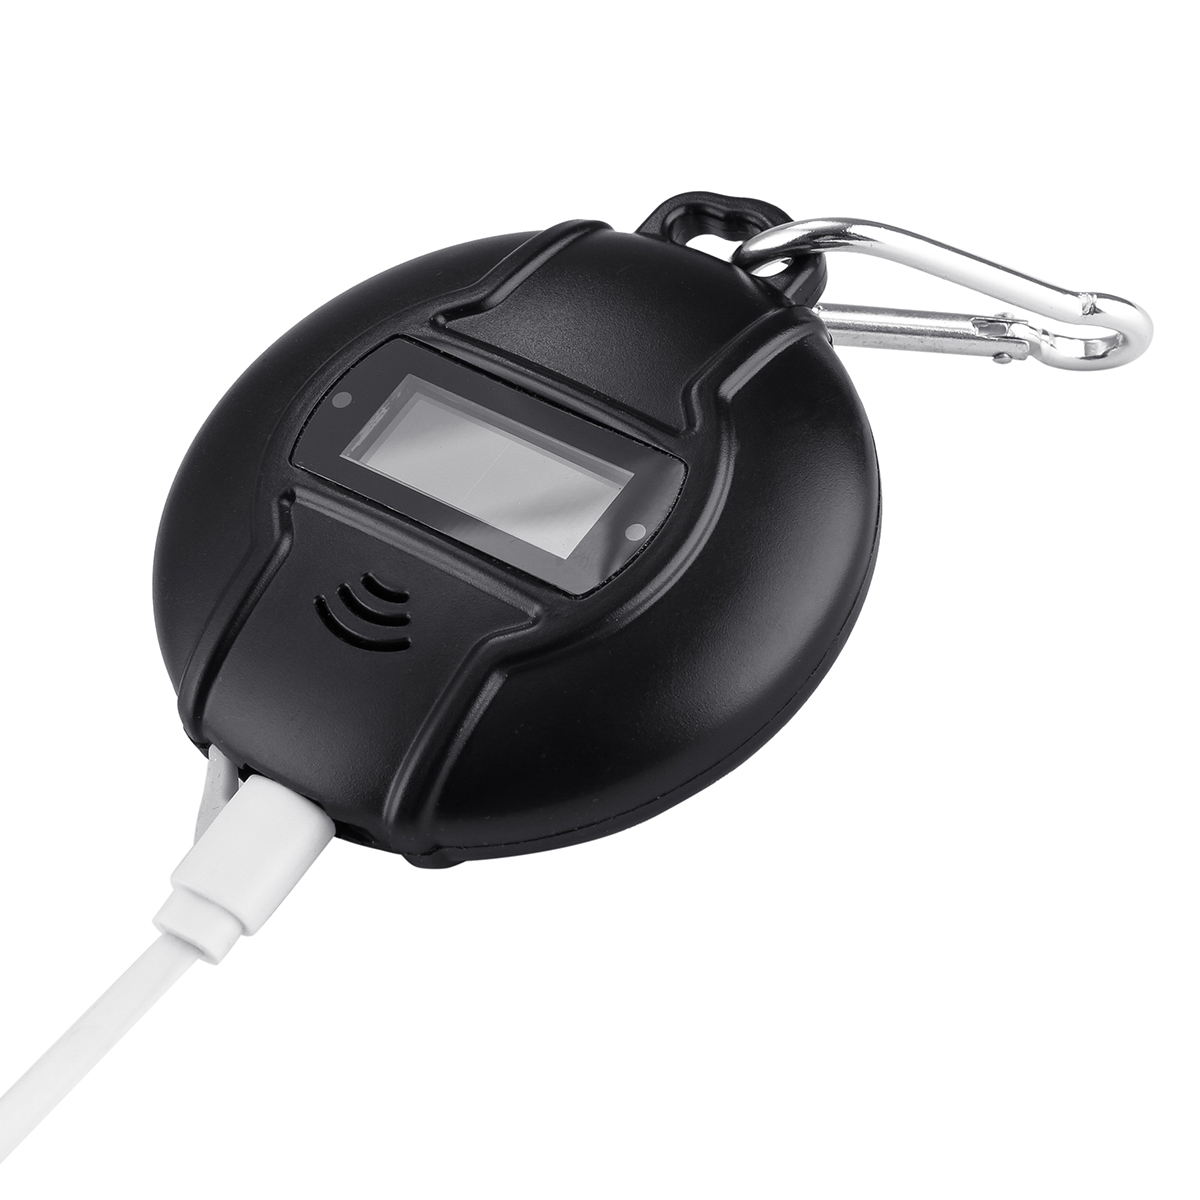 Solar-Drive-Mouse-Portable-Compass-Ultrasonic-Multifunction-Electronic-Mosquito-Repellent-Device-1276670-6